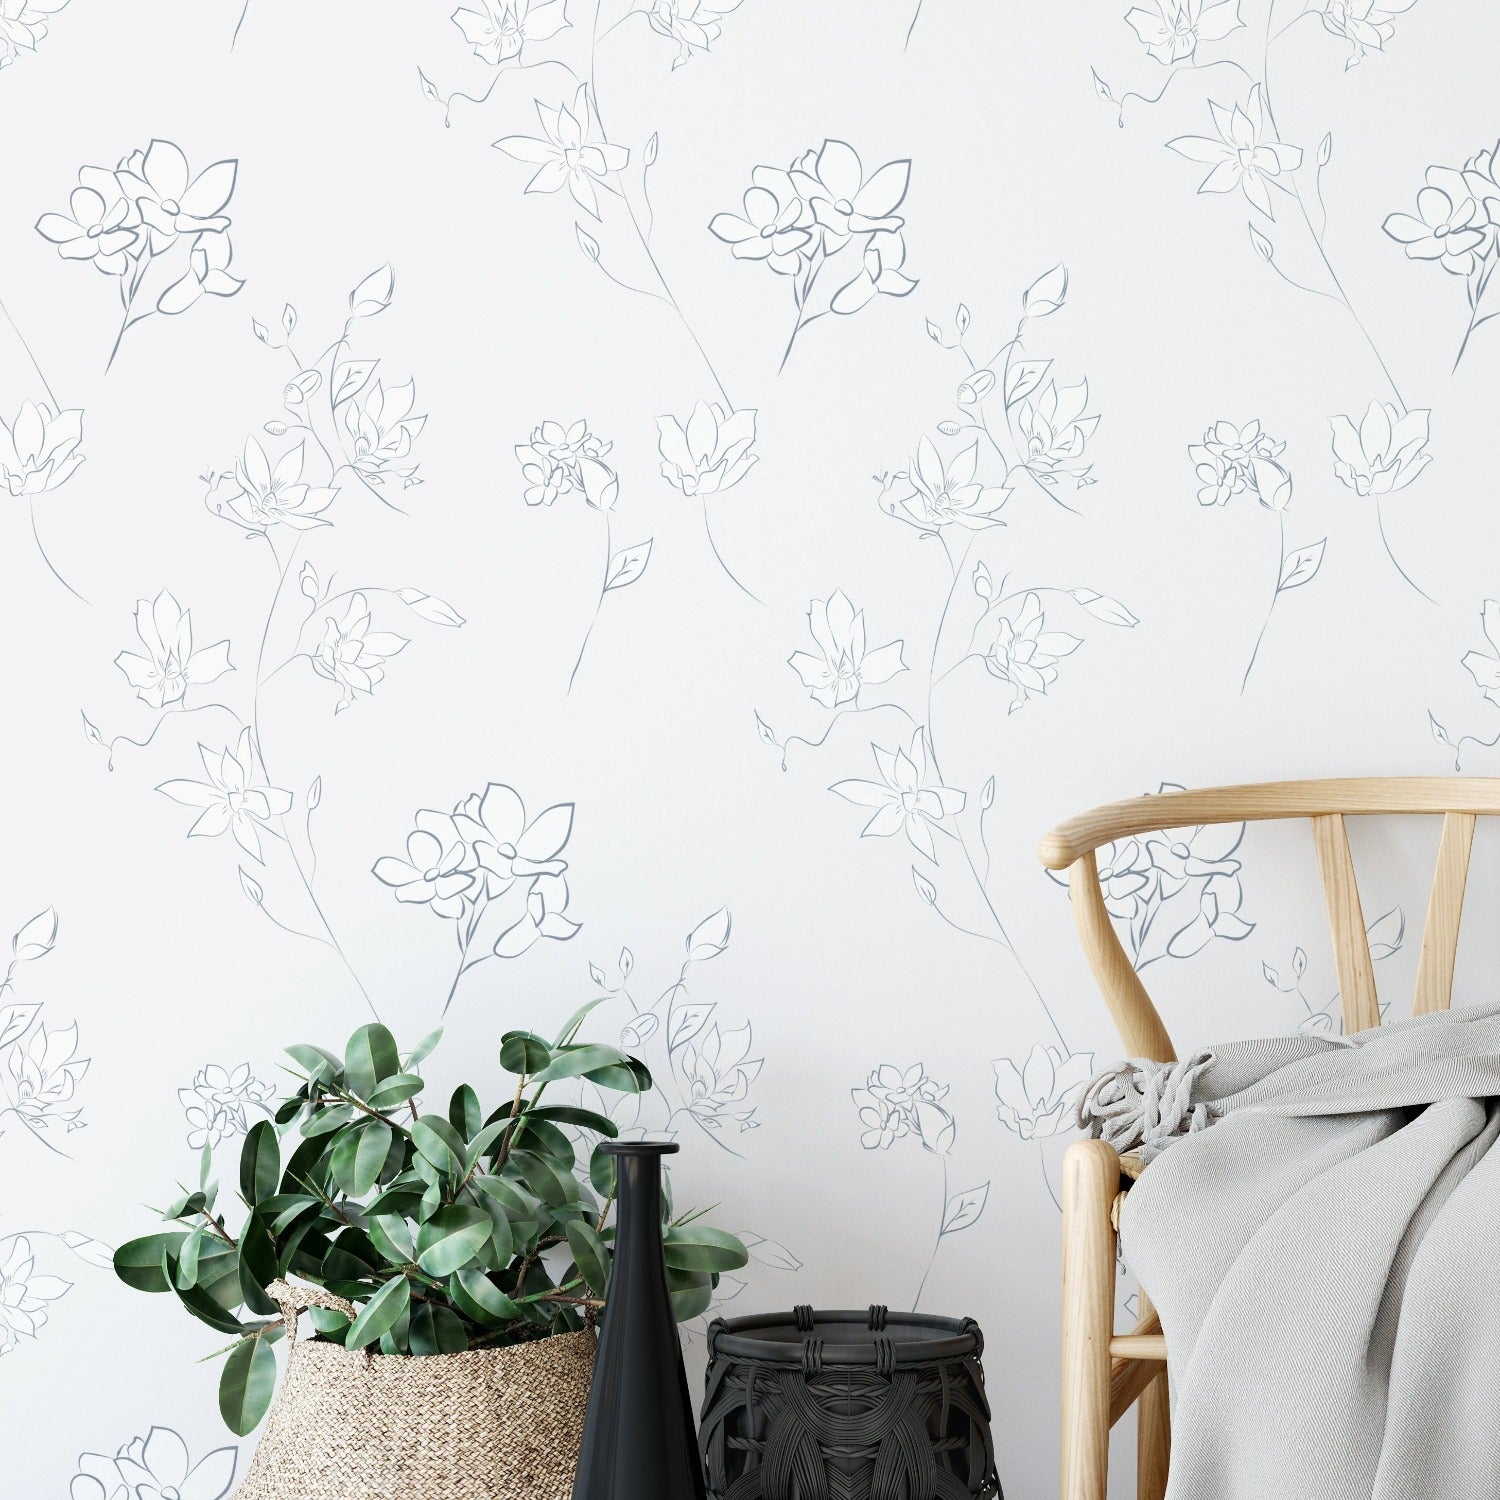 A styled room corner featuring the Minimal Floral Wallpaper IX as a backdrop, enhancing the space with its understated floral outlines. A woven basket with lush green plants and a wooden chair with a cozy blanket highlight the wallpaper's serene and clean design.